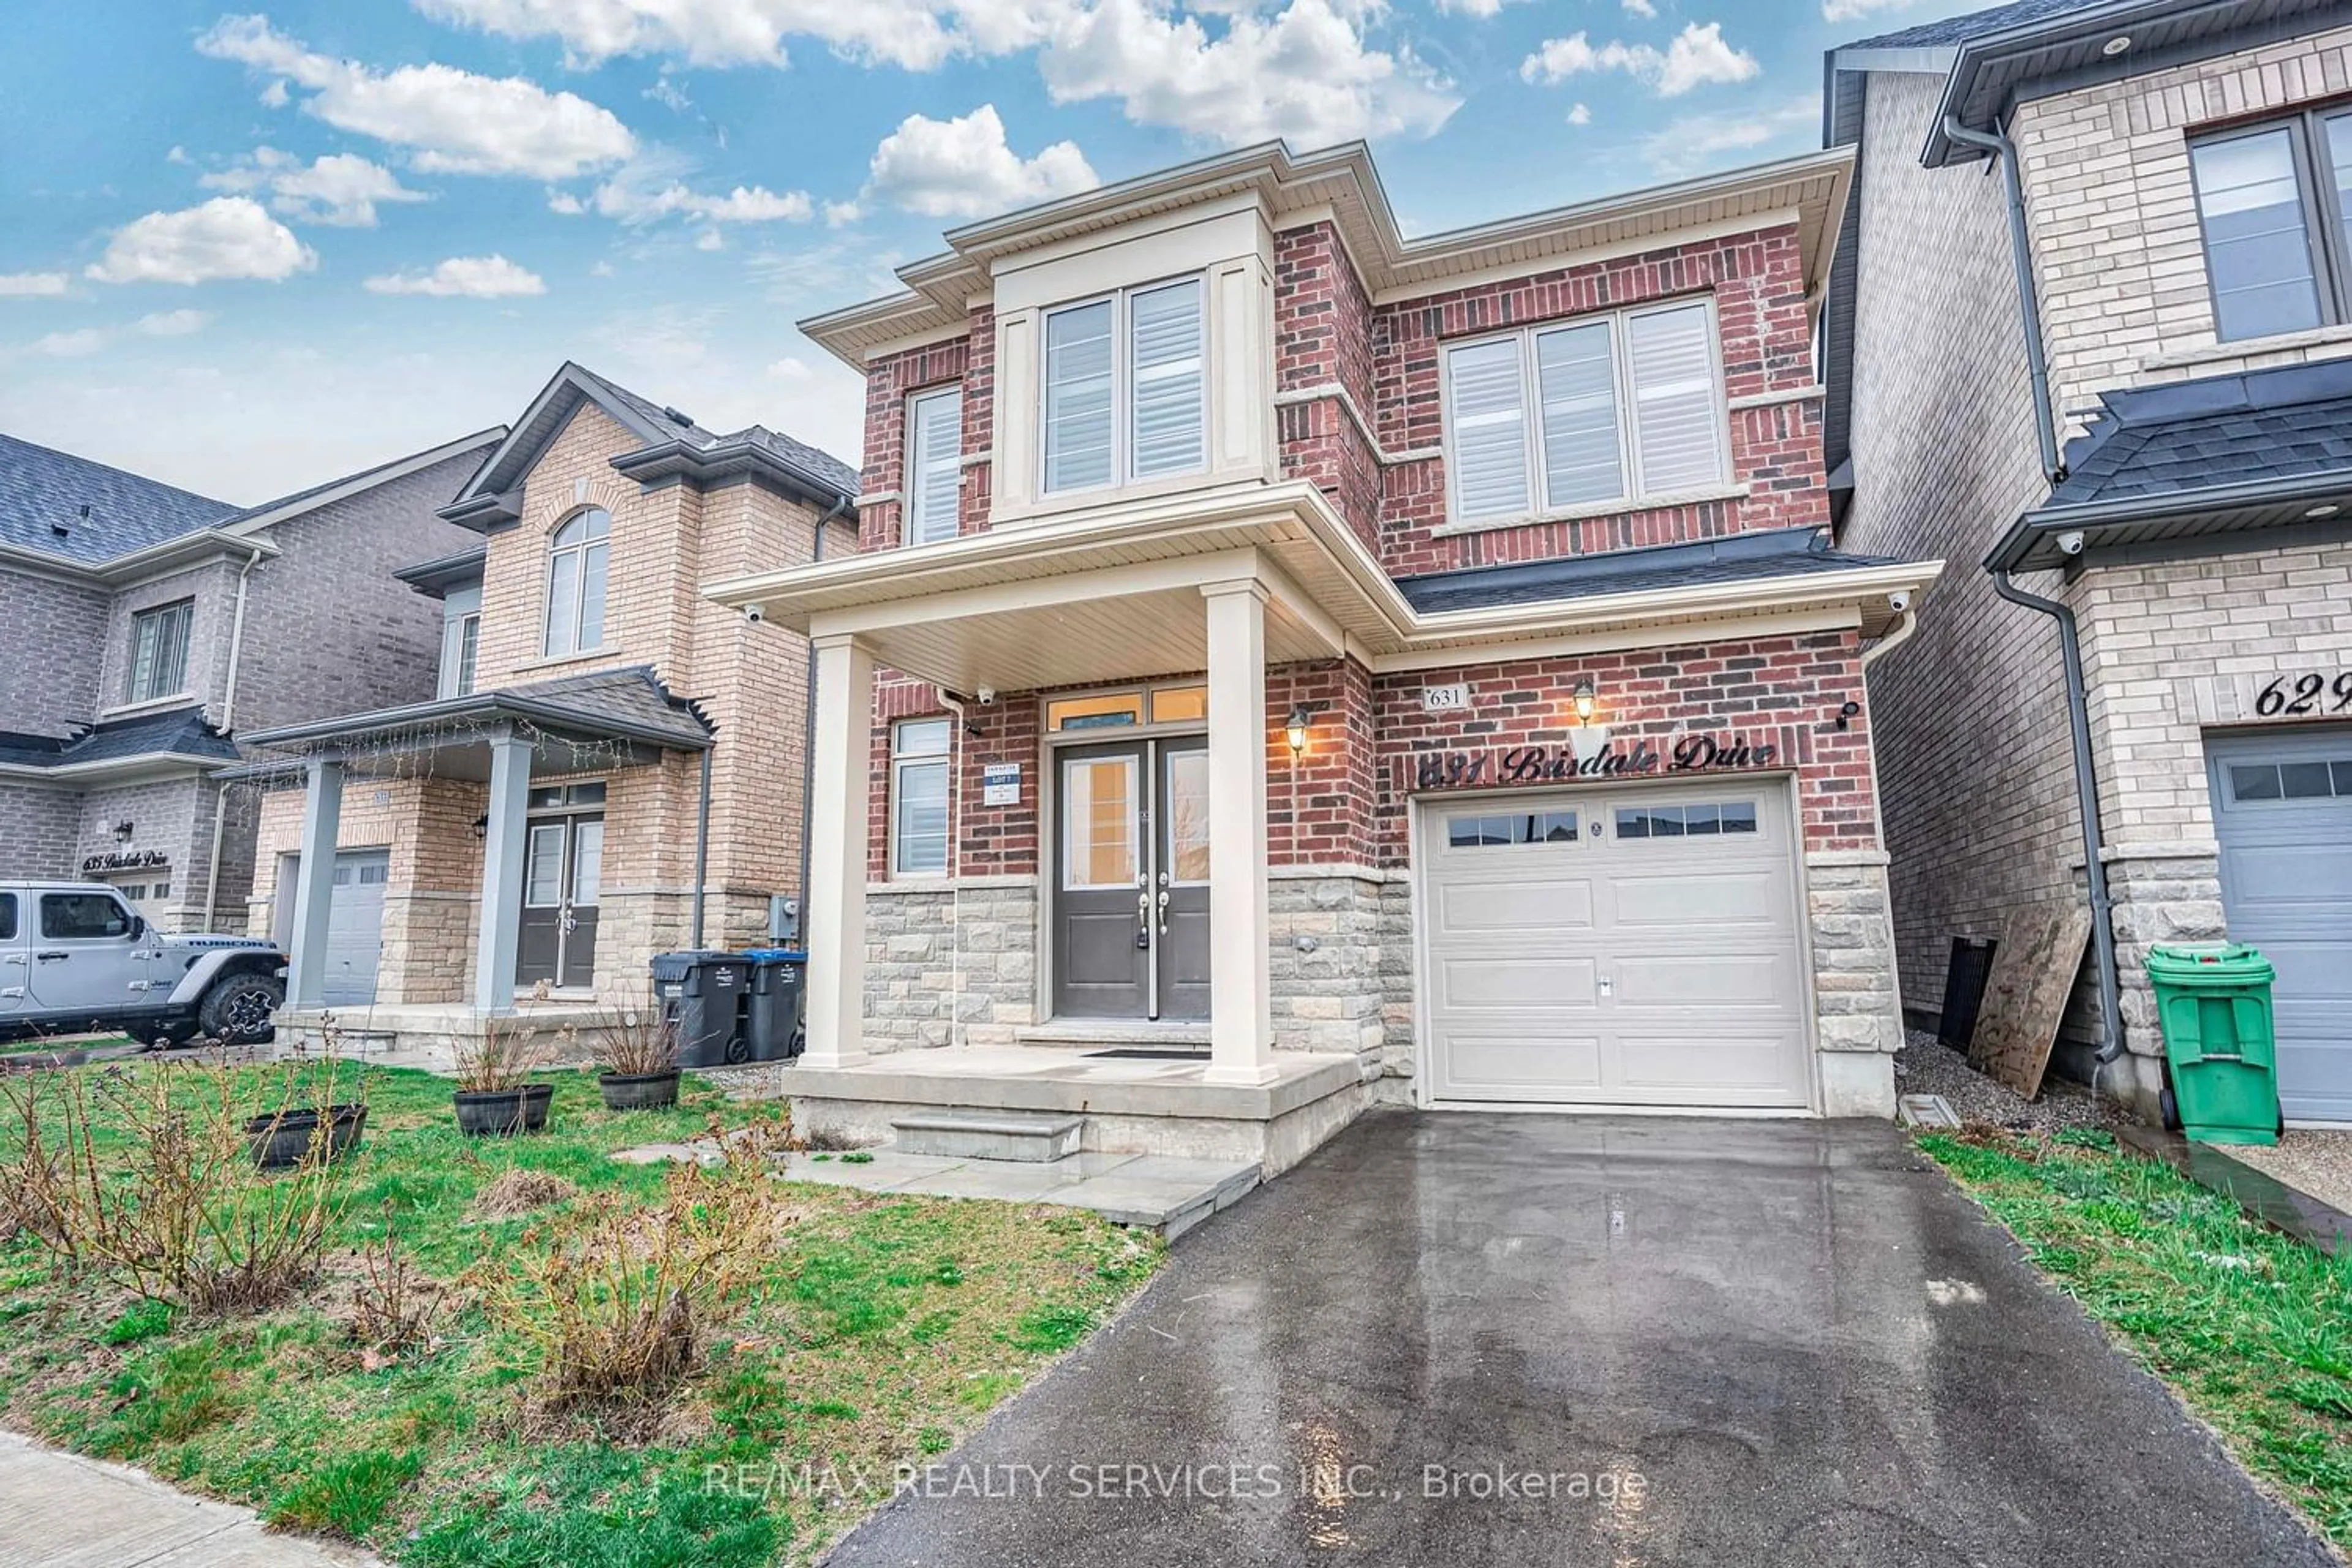 Home with brick exterior material for 631 Brisdale Dr, Brampton Ontario L7A 5B6